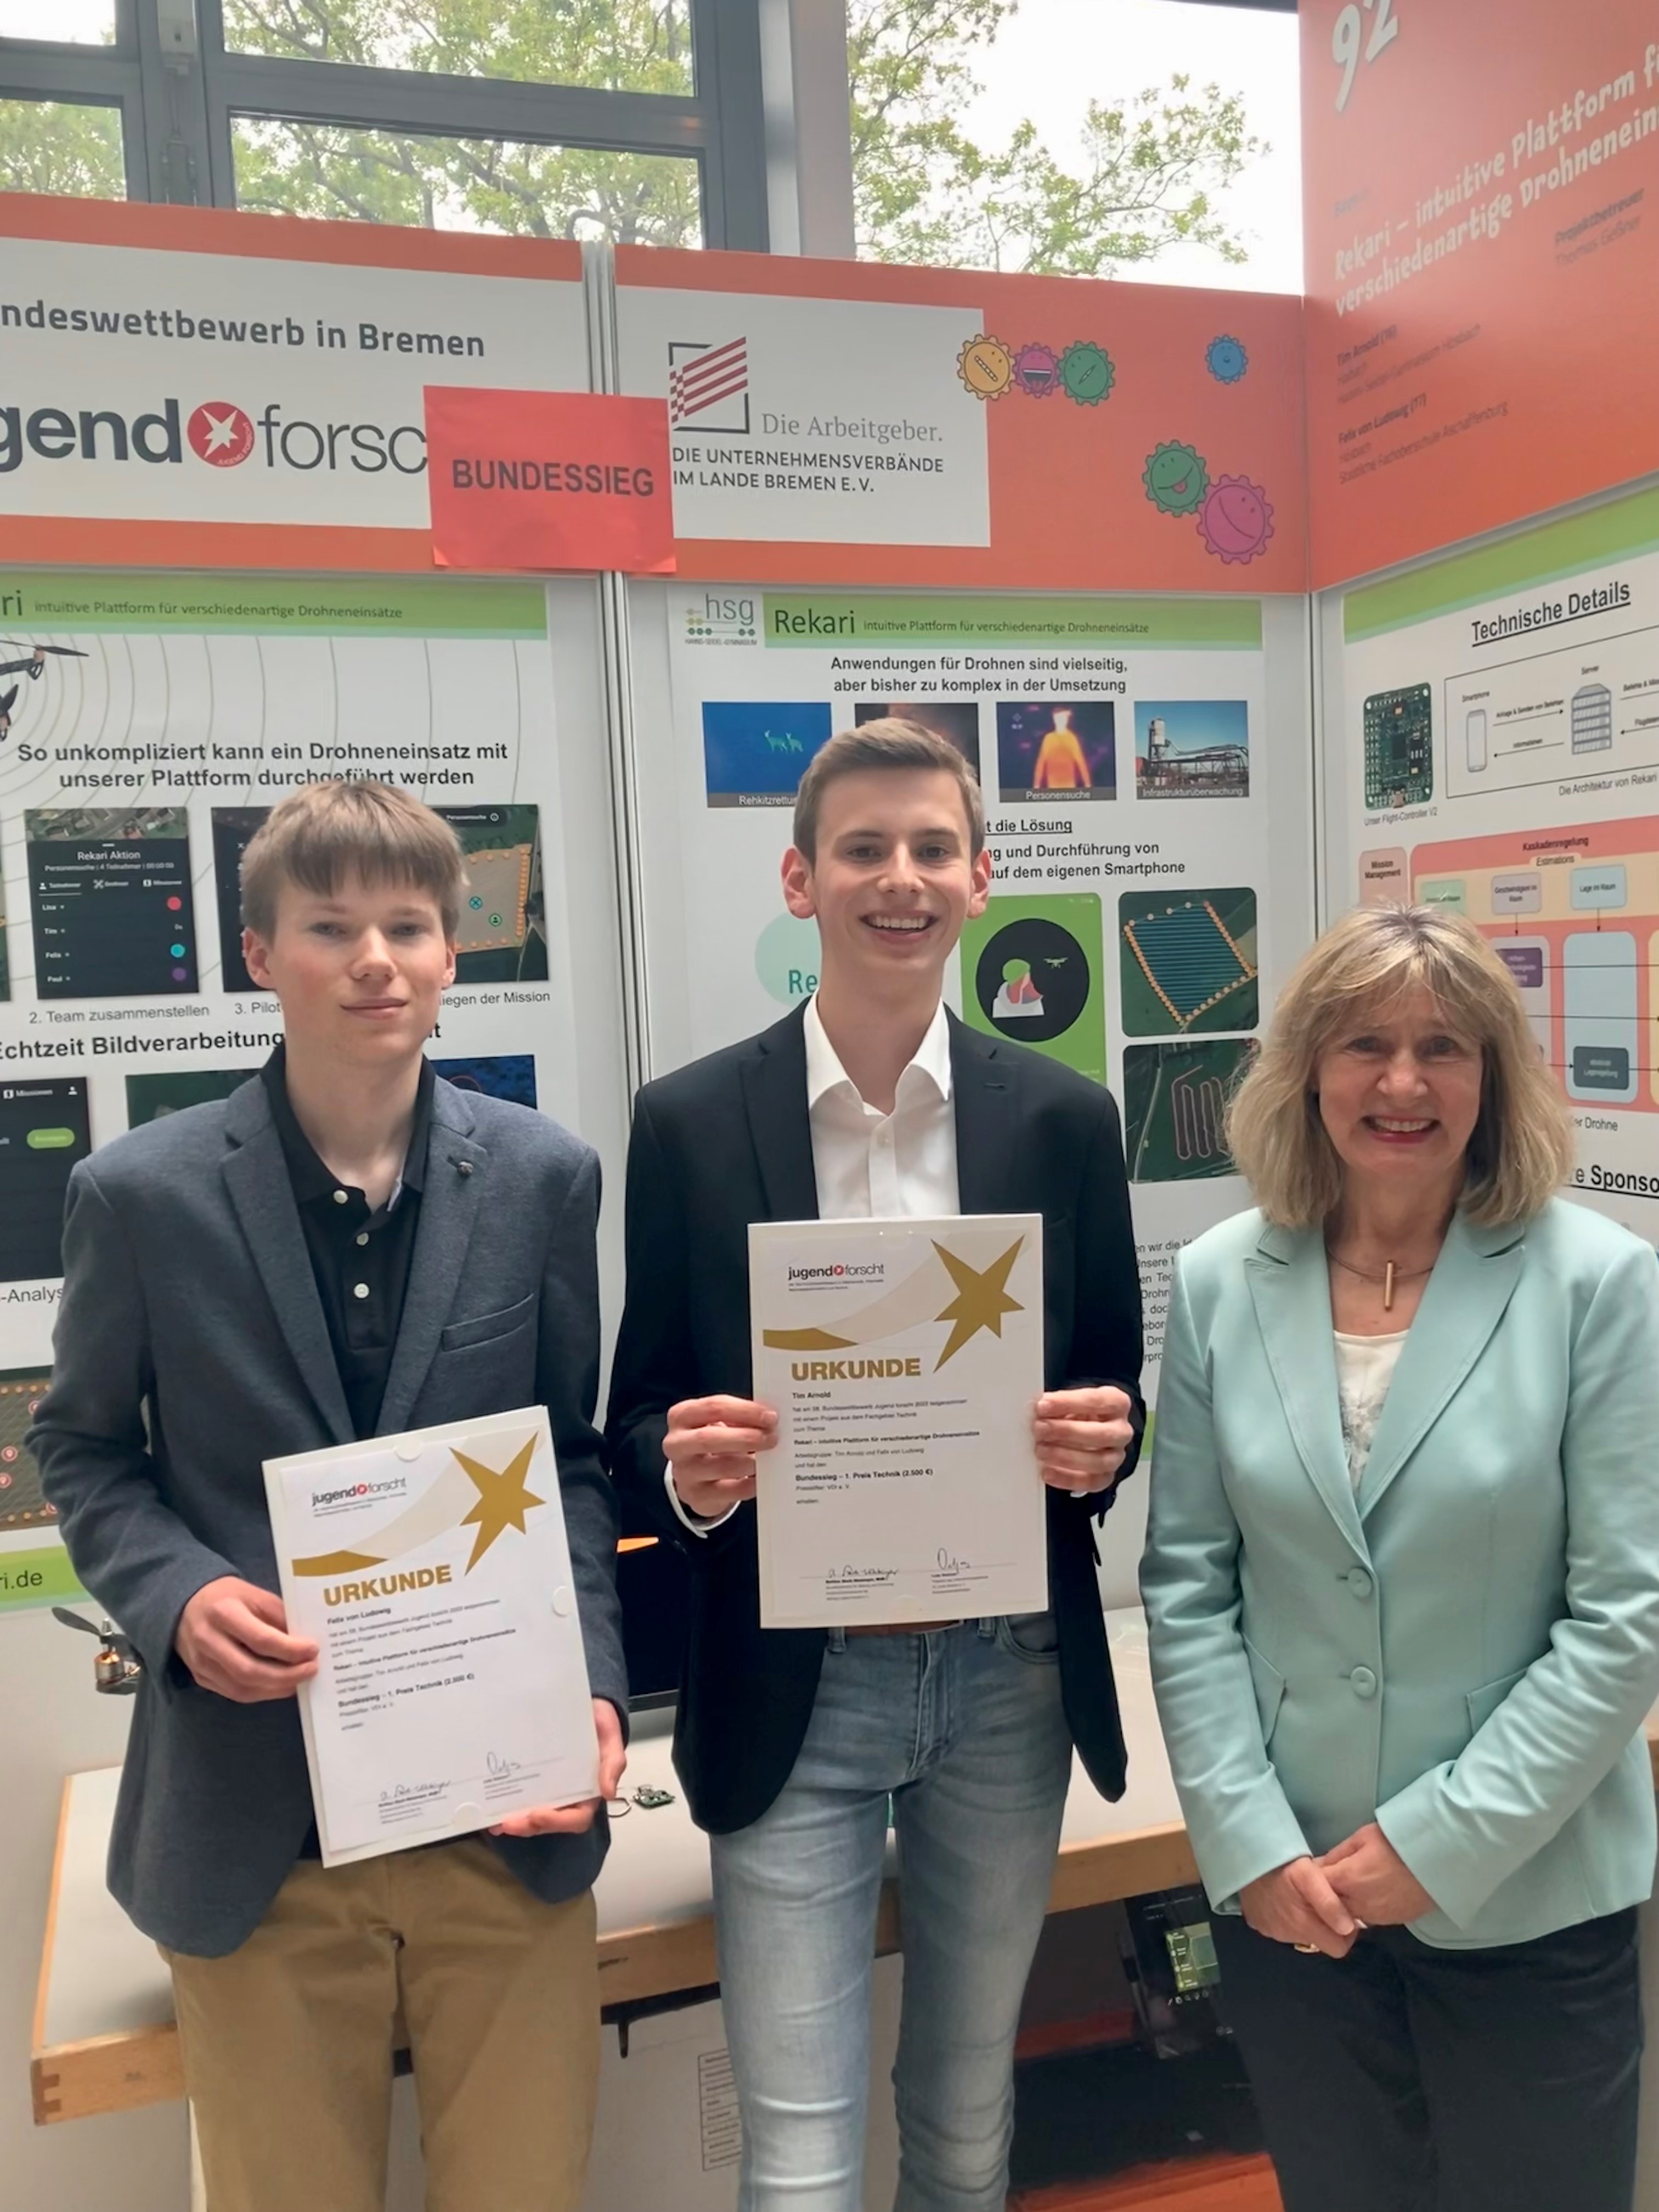 The national winners in the subject of technology (from left to right): Felix von Ludowig and Tim Arnold. The Europe Prize was officially presented by Dr. Heide Ahrens